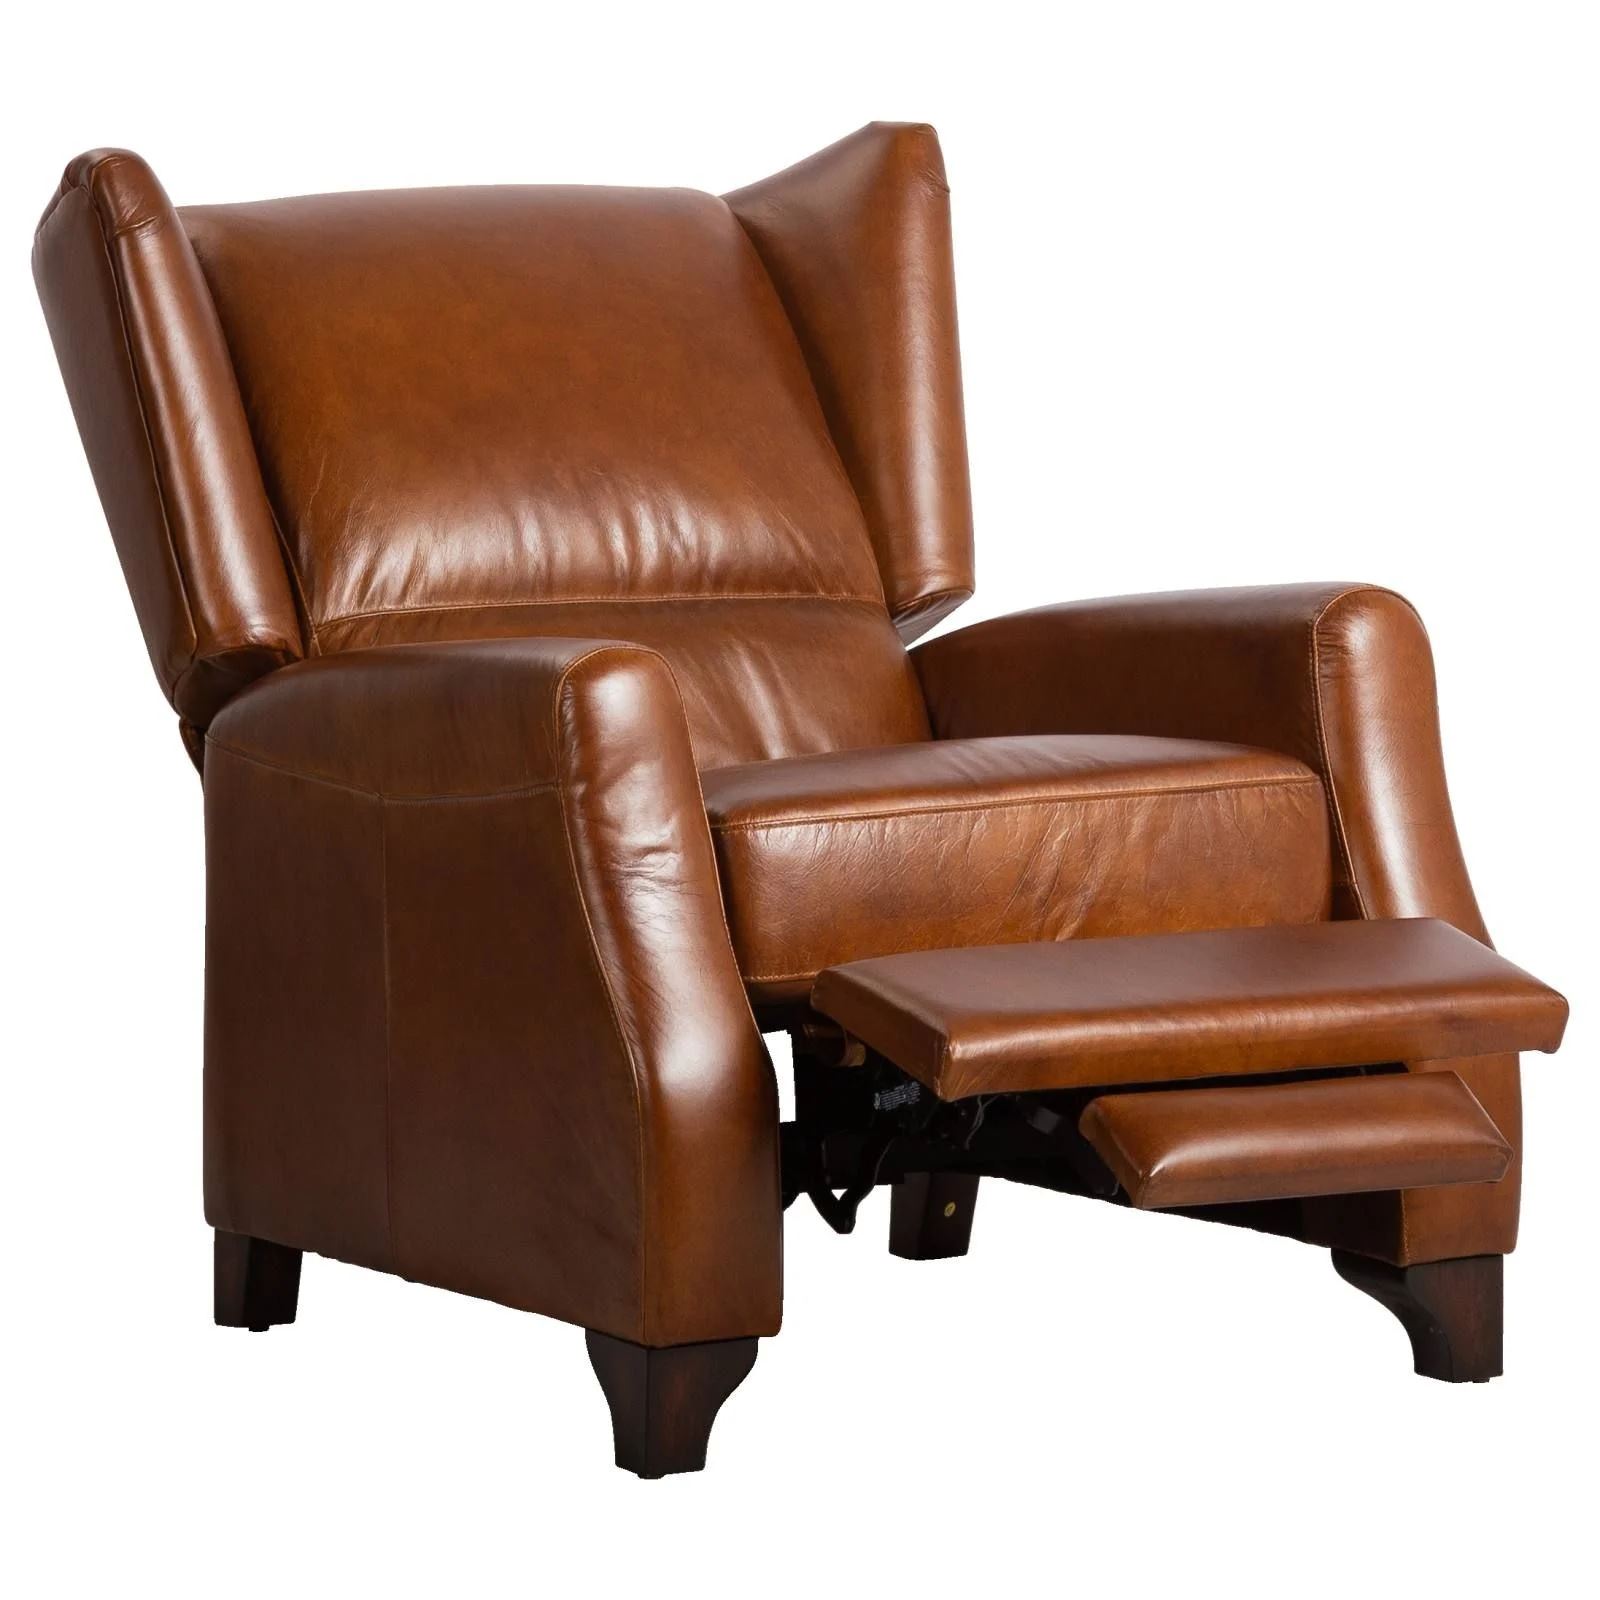 Recliner chair Plymouth